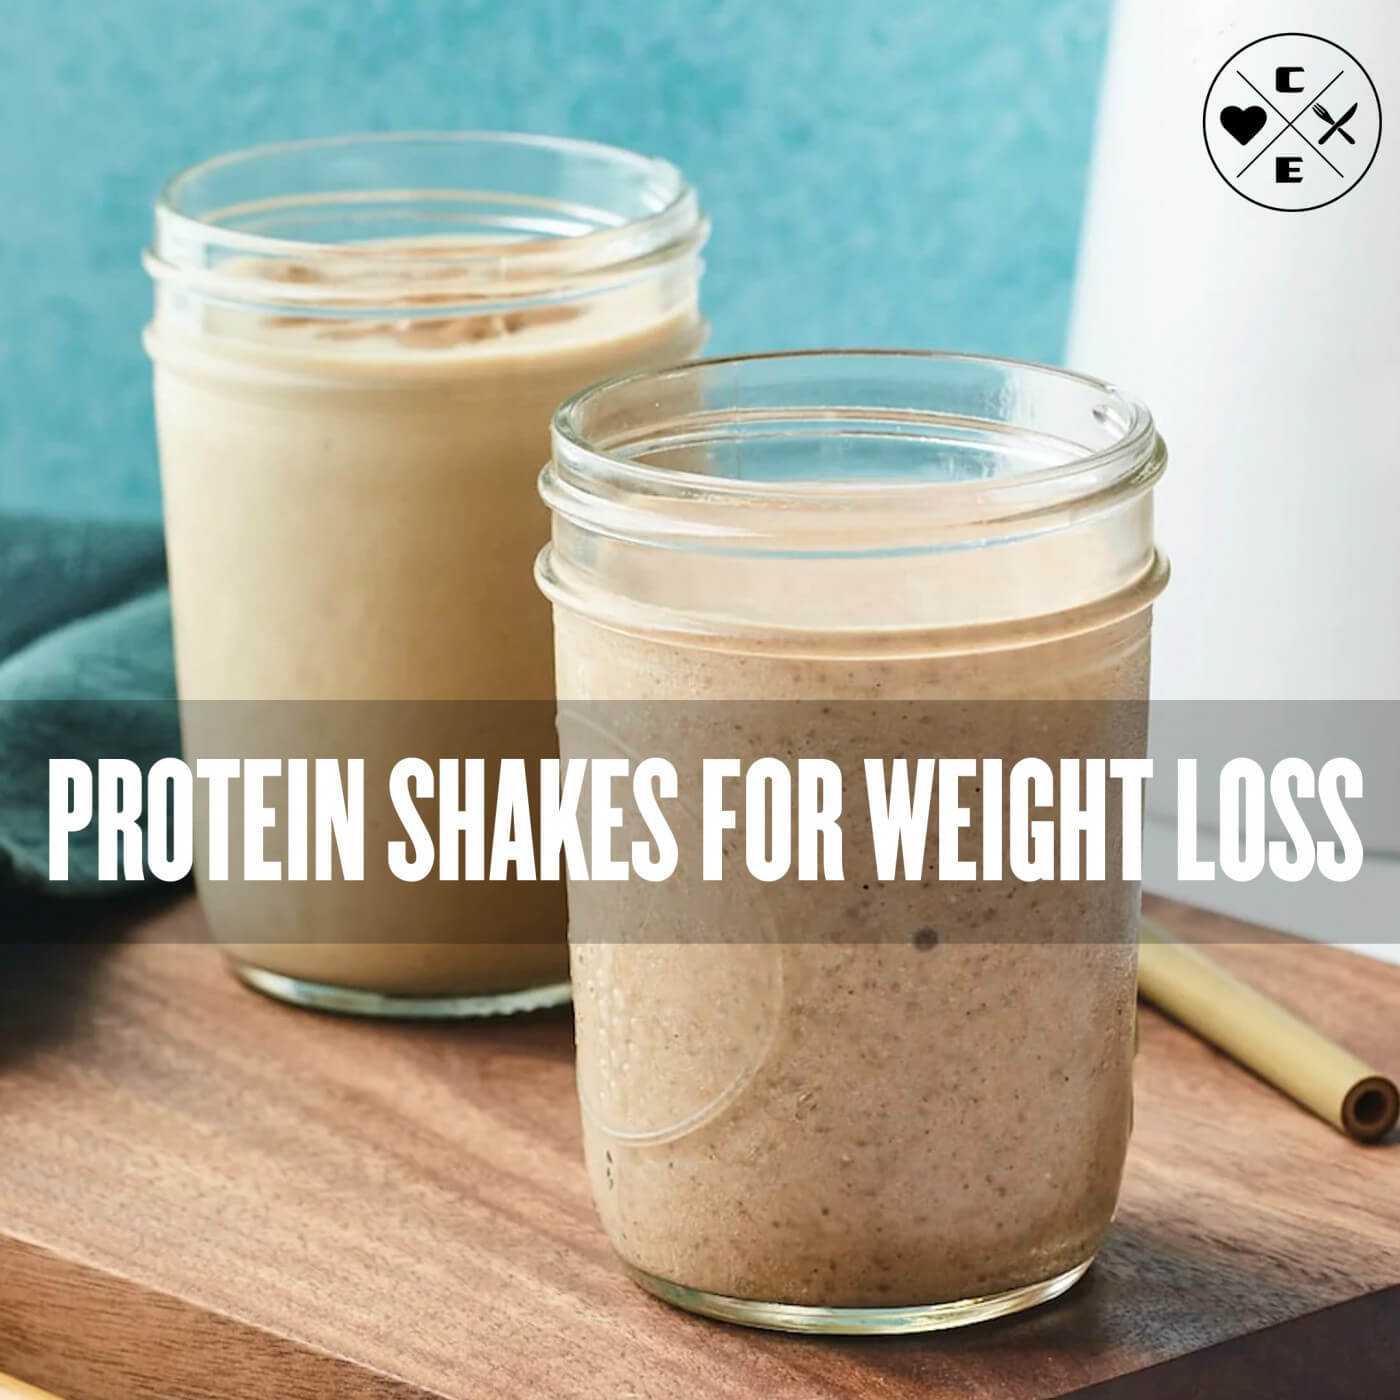 Are Protein Shakes Effective For Weight Loss?